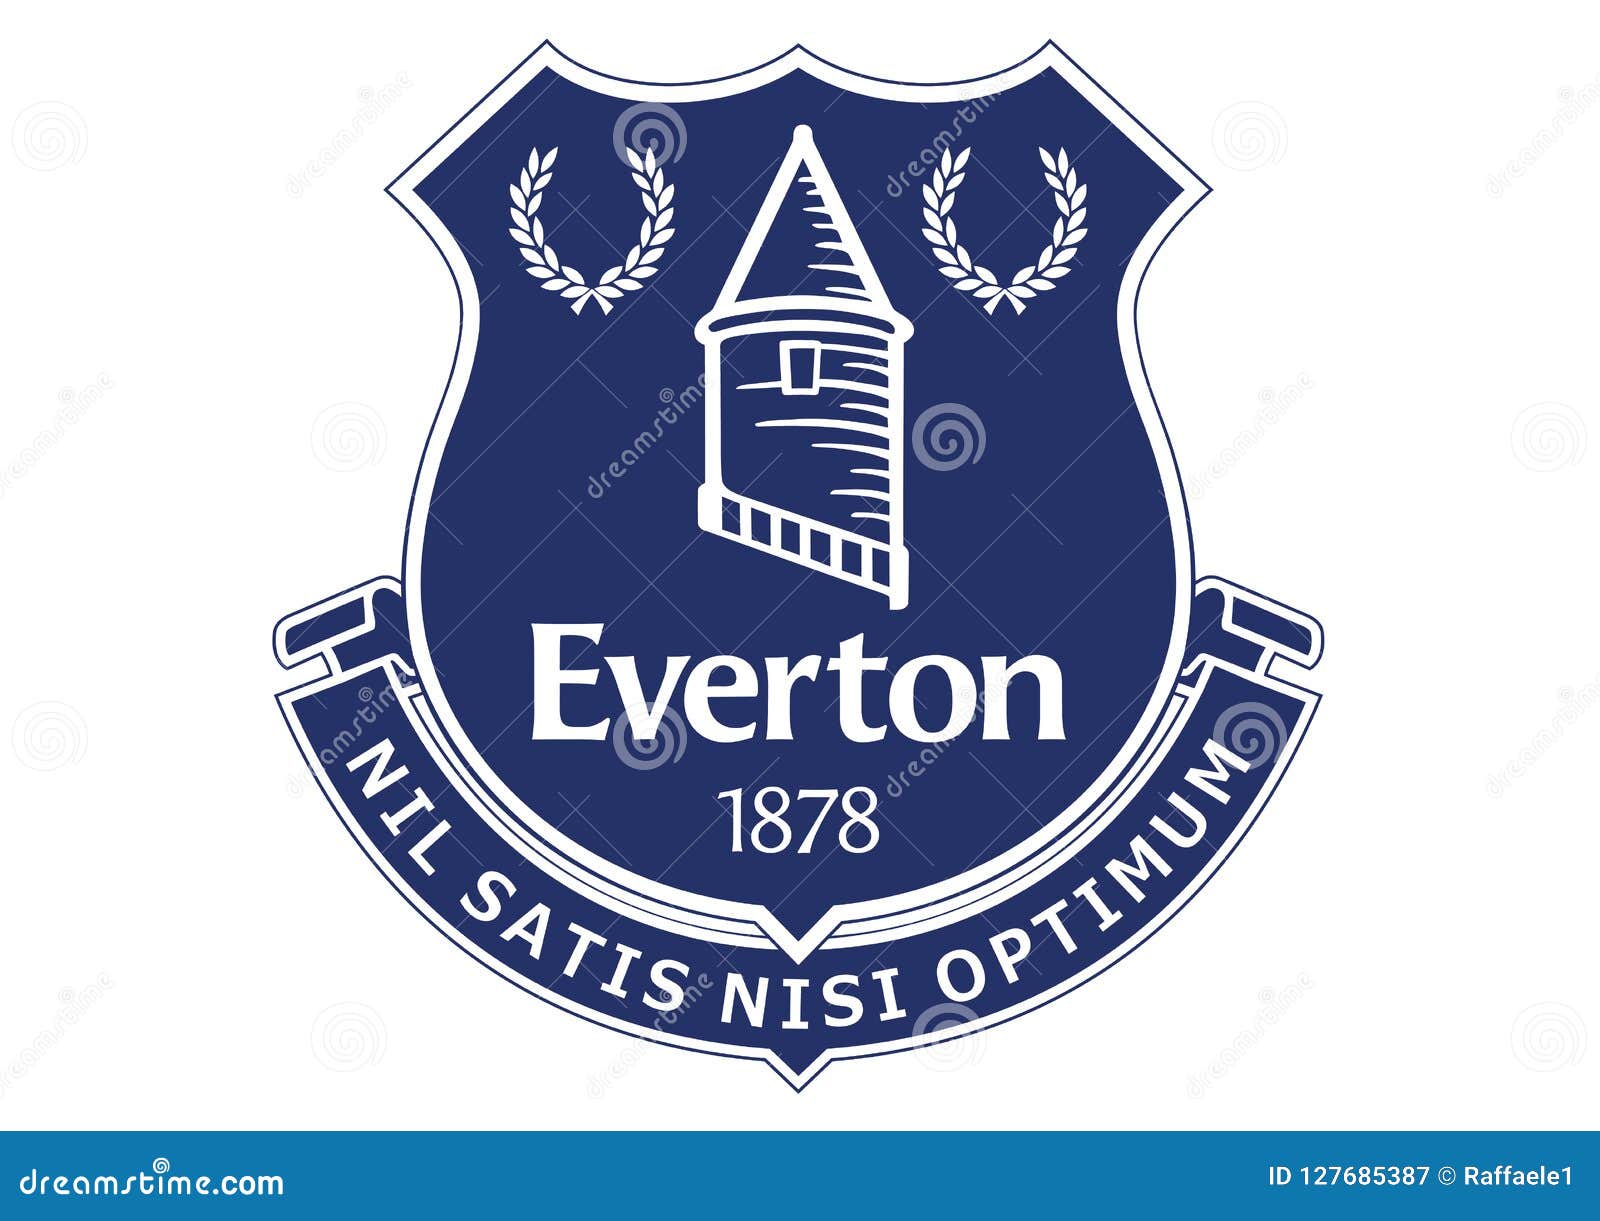 84 Everton Football Club Stock Video Footage - 4K and HD Video Clips |  Shutterstock